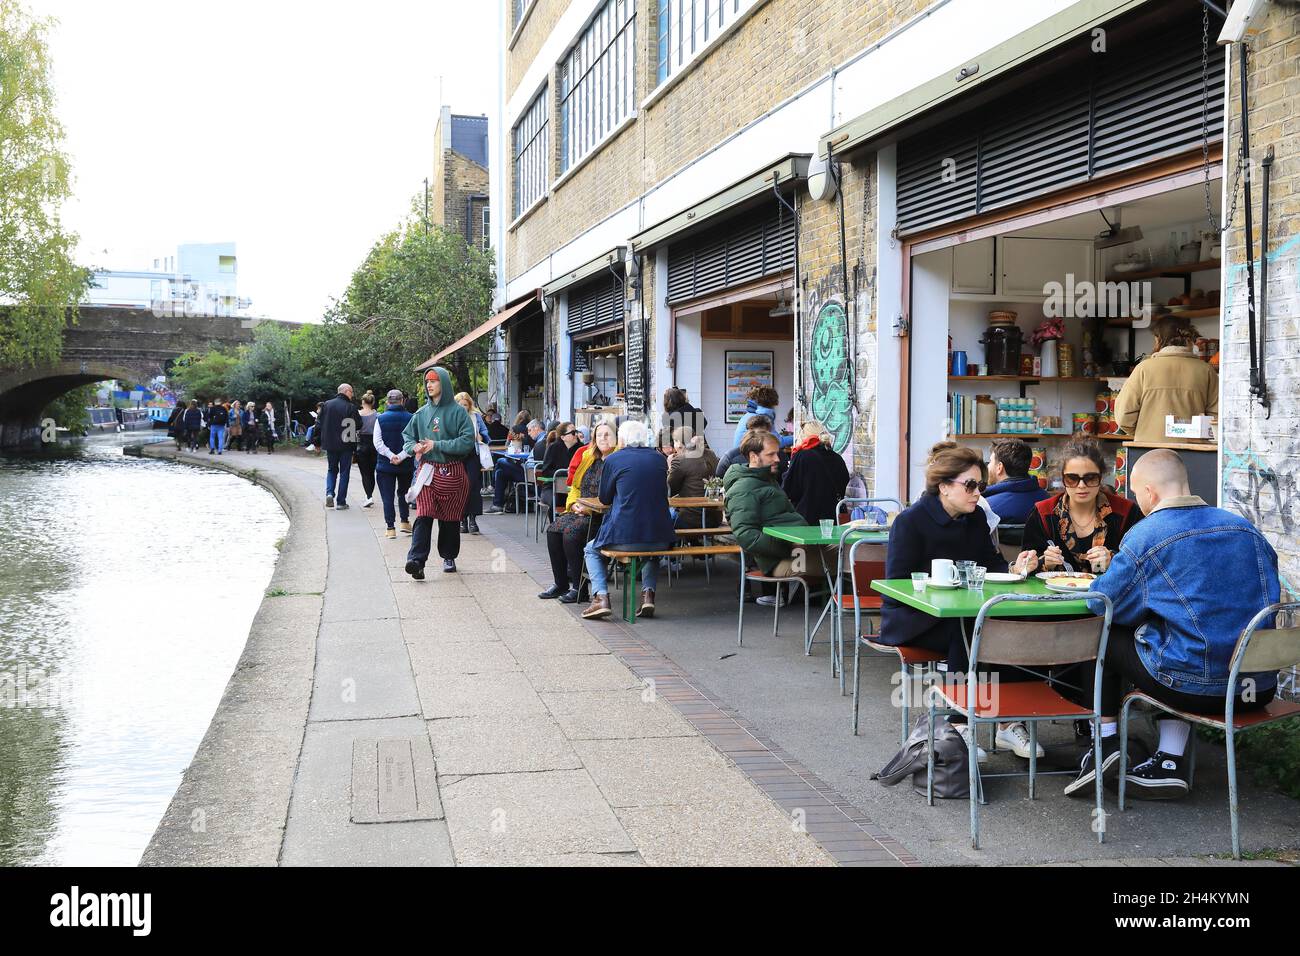 The popular Towpath Cafe in autumn on Regents Canal in Haggerston, east London, UK Stock Photo